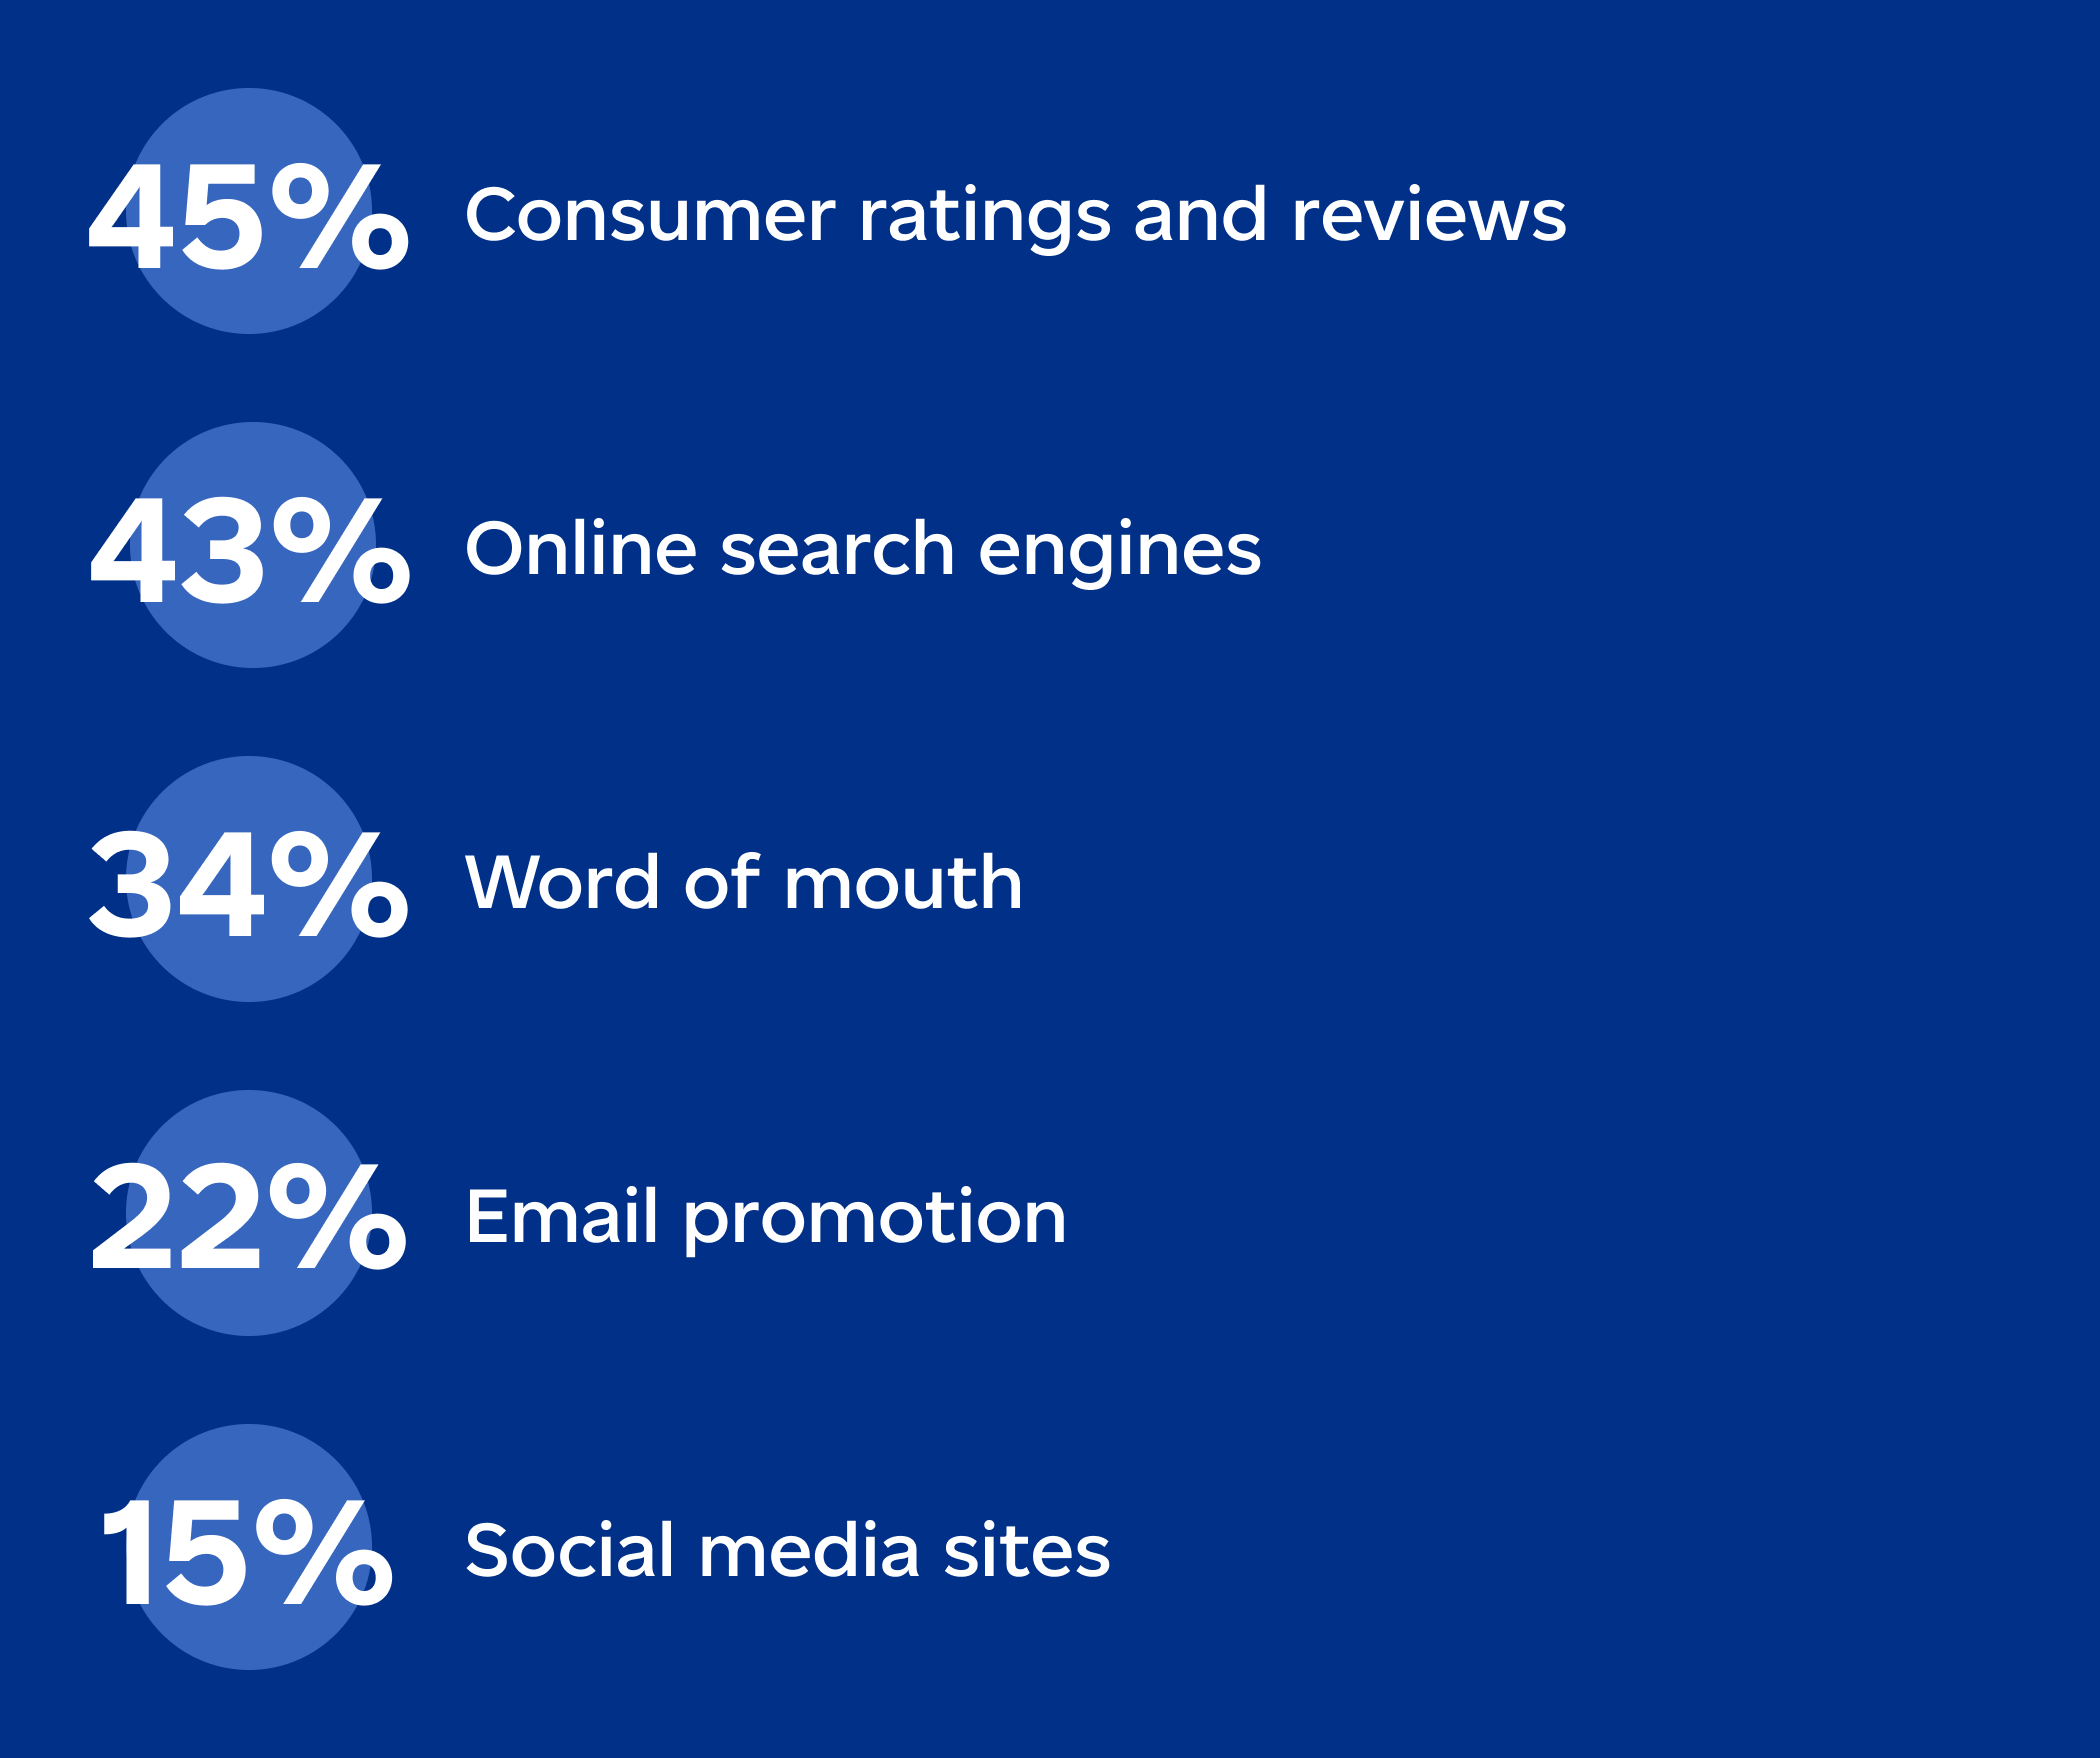 Where are shoppers looking? Consumer ratings and reviews (45%), online search engines (43%), word of mouth (34%), email promotion (22%), social media sites (15%). Statistics courtesy of Phase 5, Canadian Online Shopper Study, May 2022.